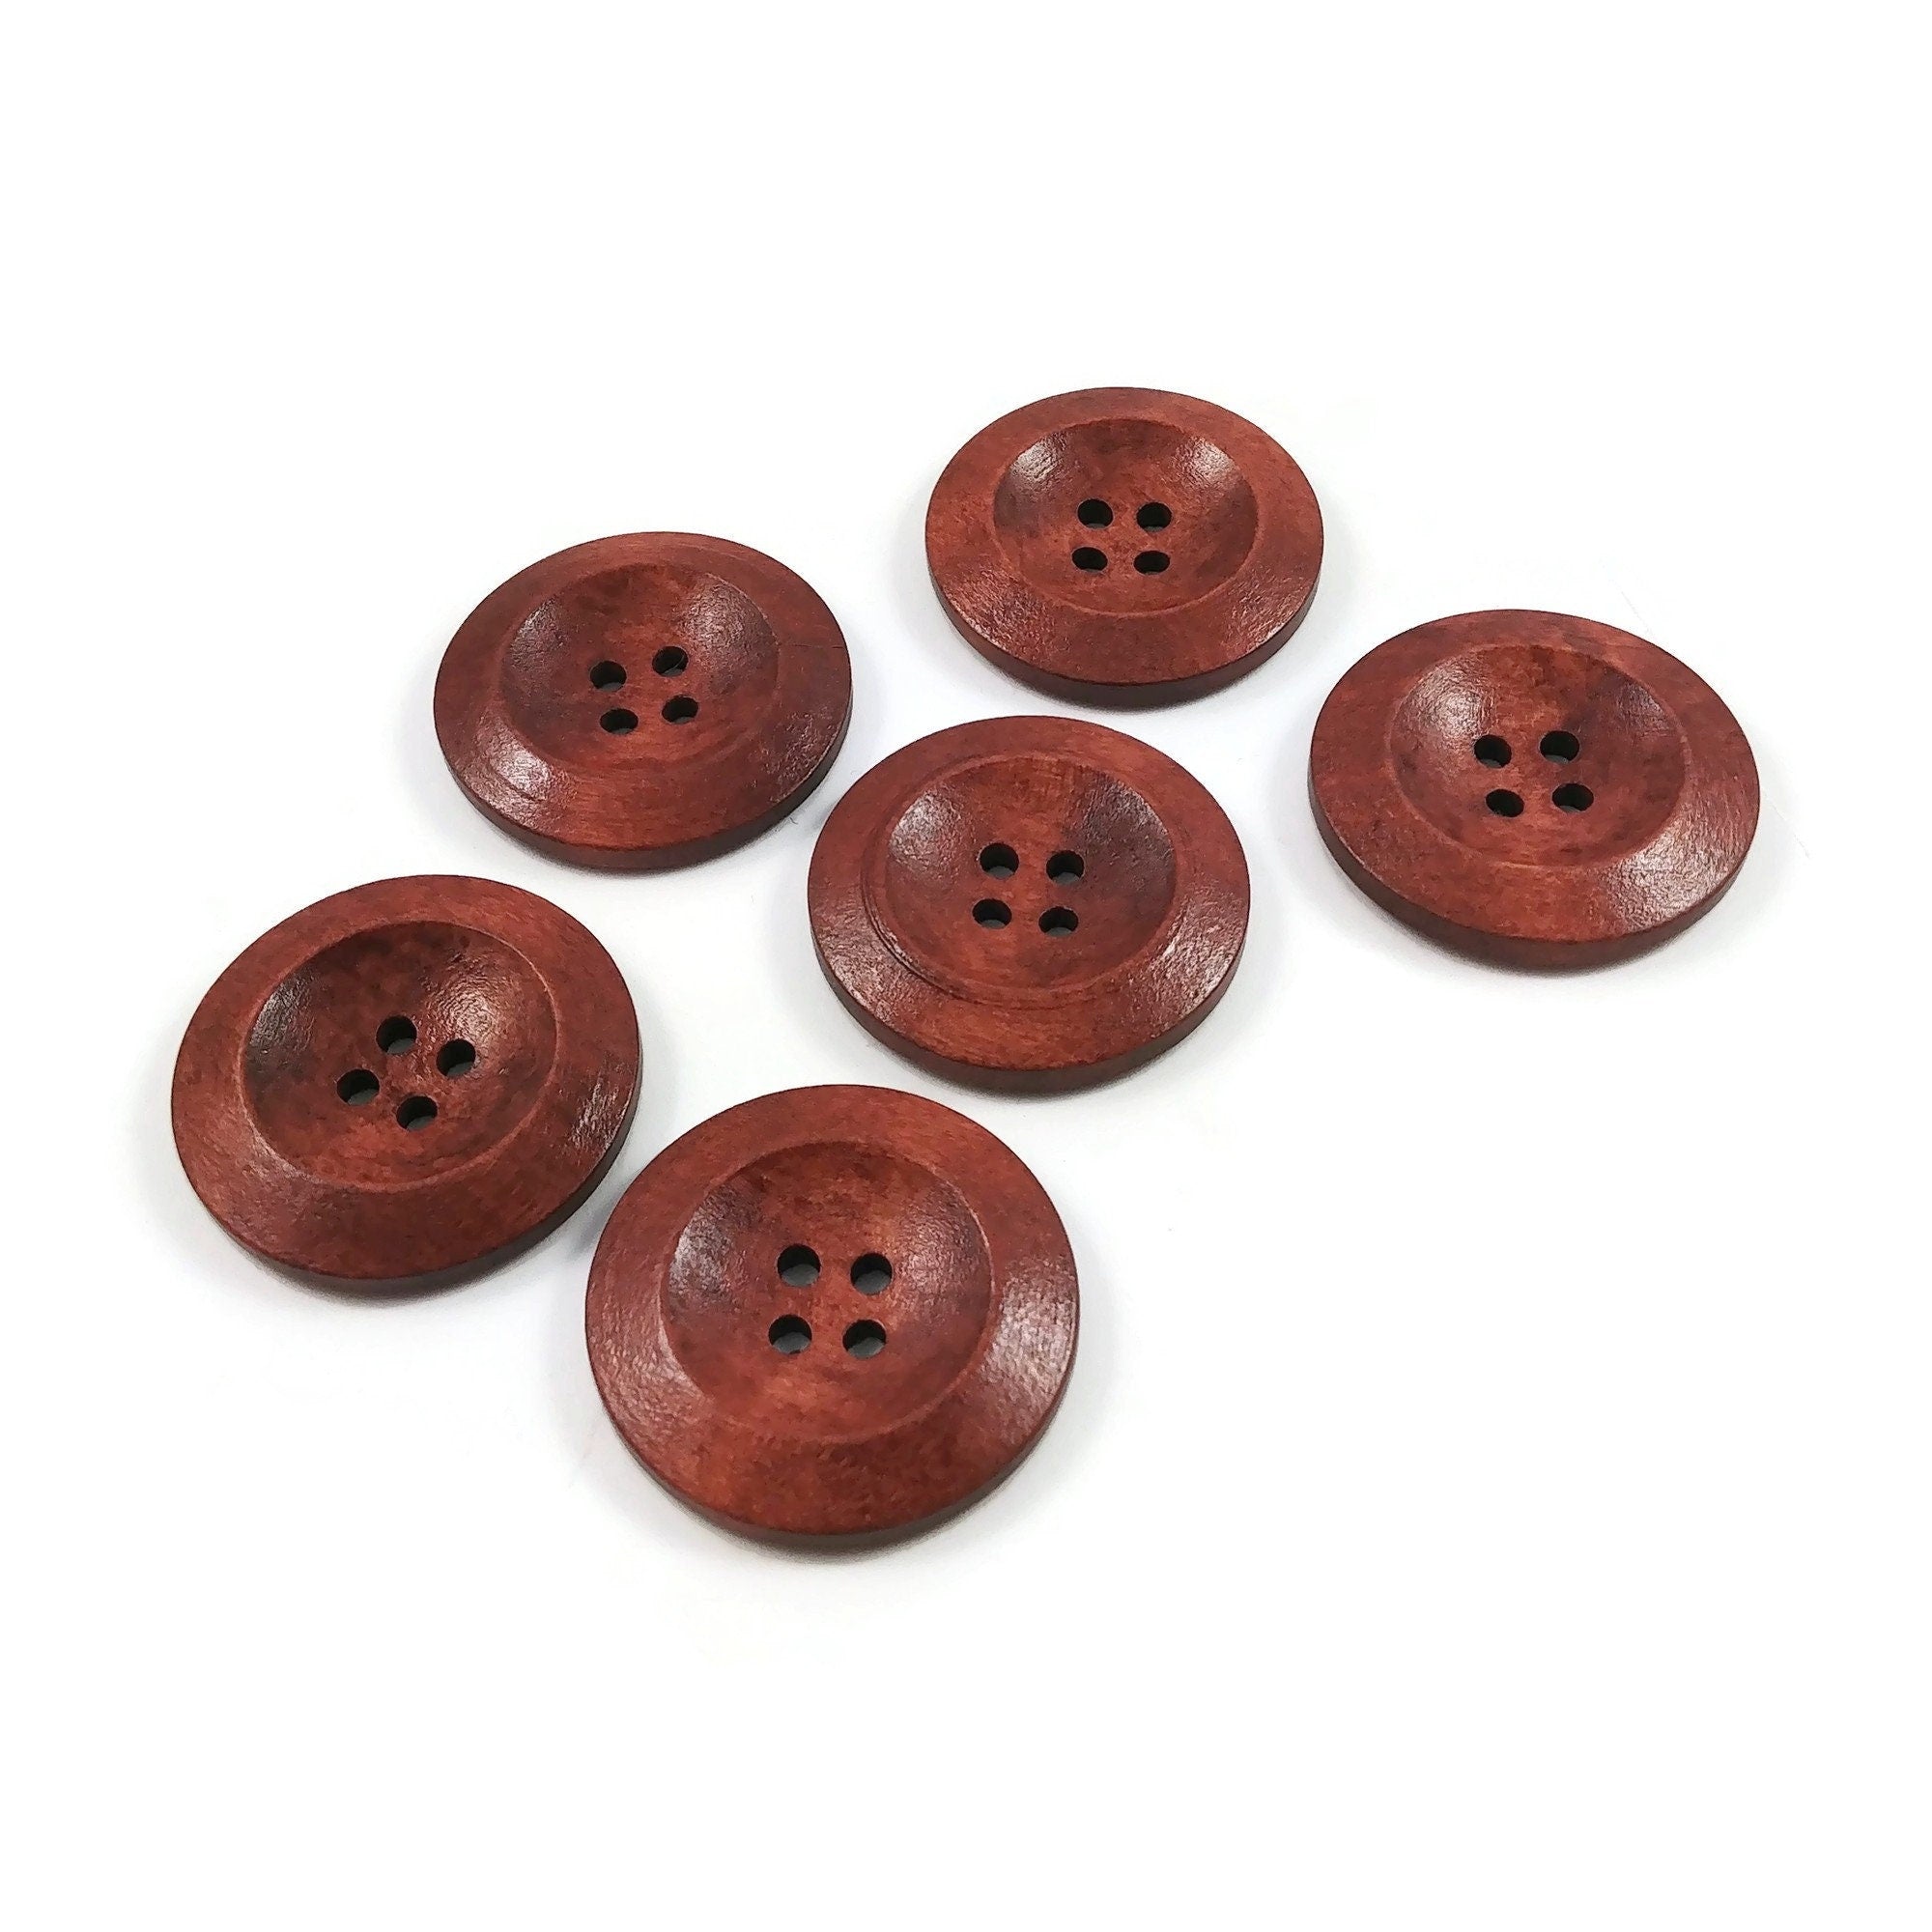 10mm tiny wooden buttons, 6 small natural buttons, Cute mini buttons f